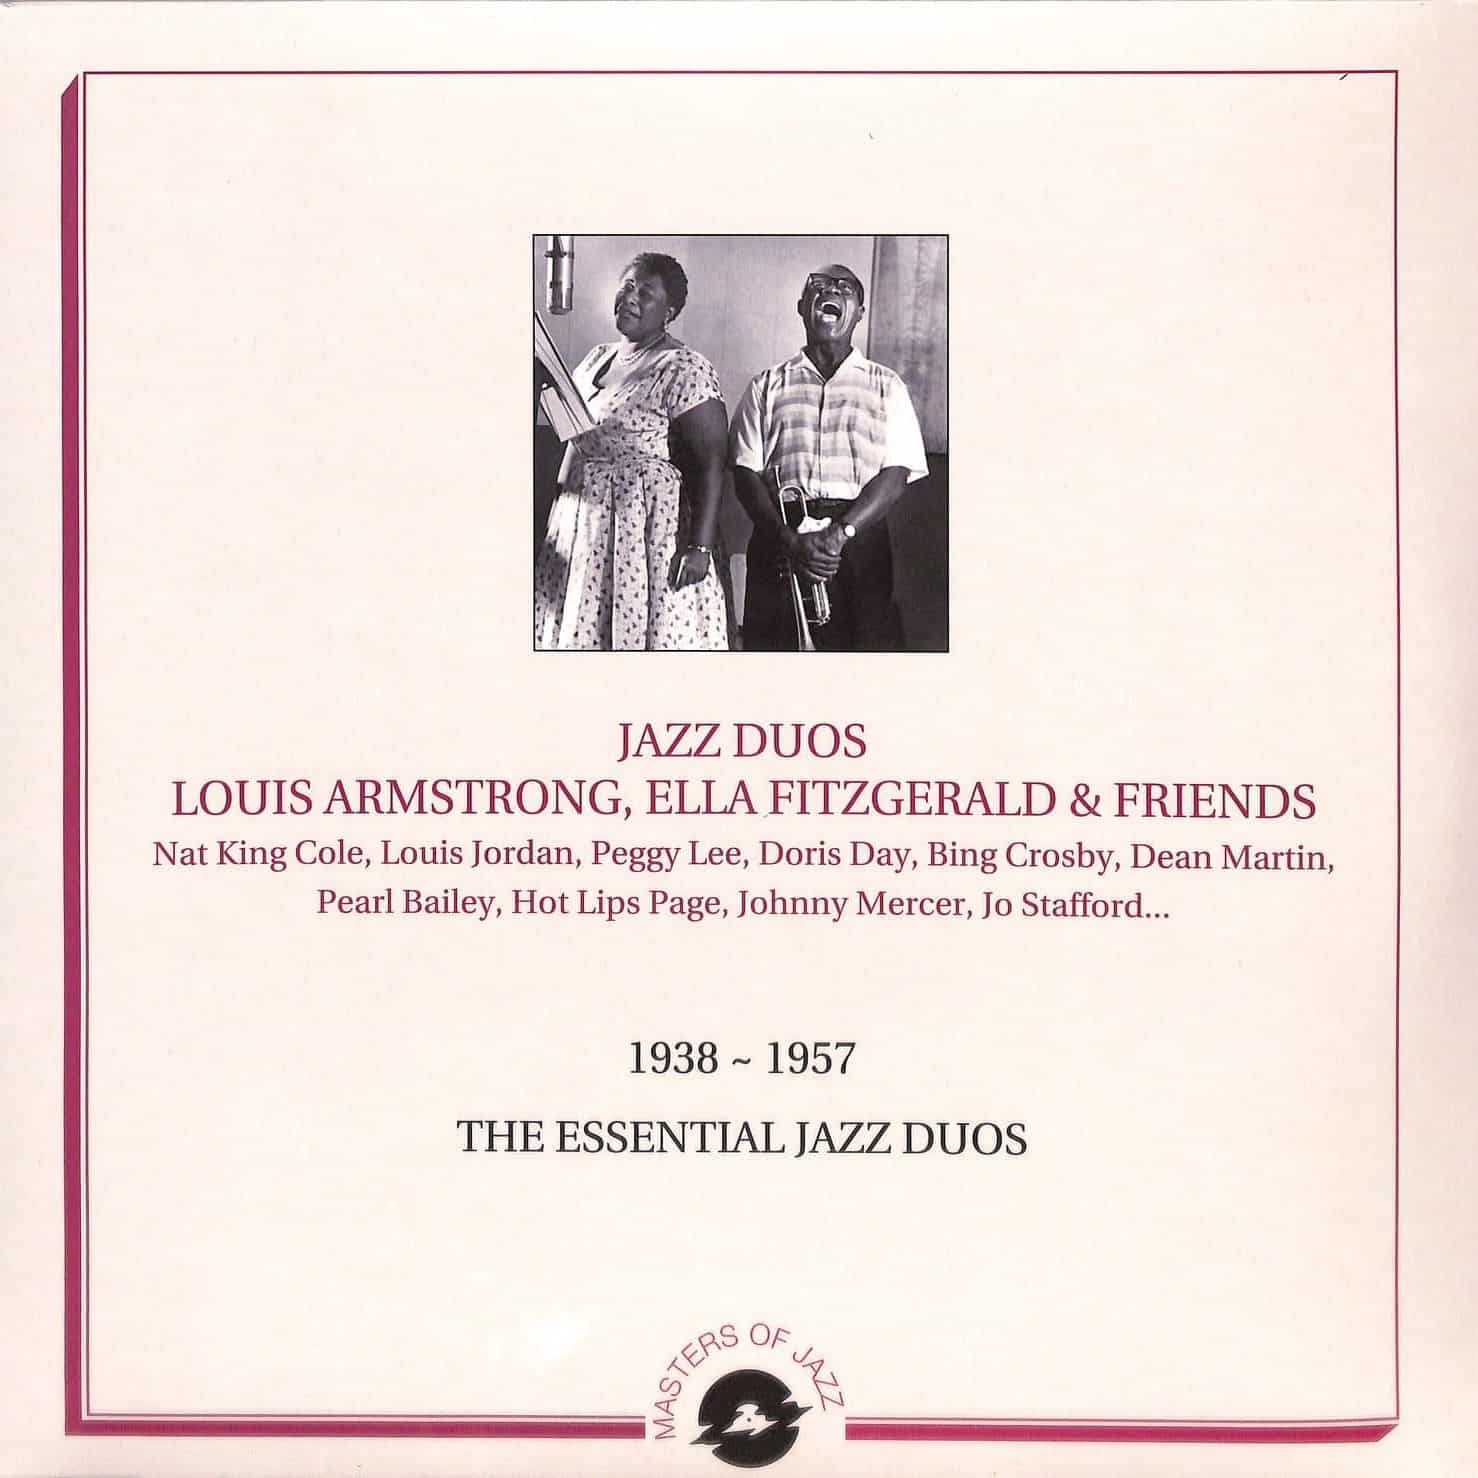 LOUIS ARMSTRONG, ELLA FITZGERALD & FRIENDS - JAZZ DUOS: 1938-1957 ESSENTIAL WORKS